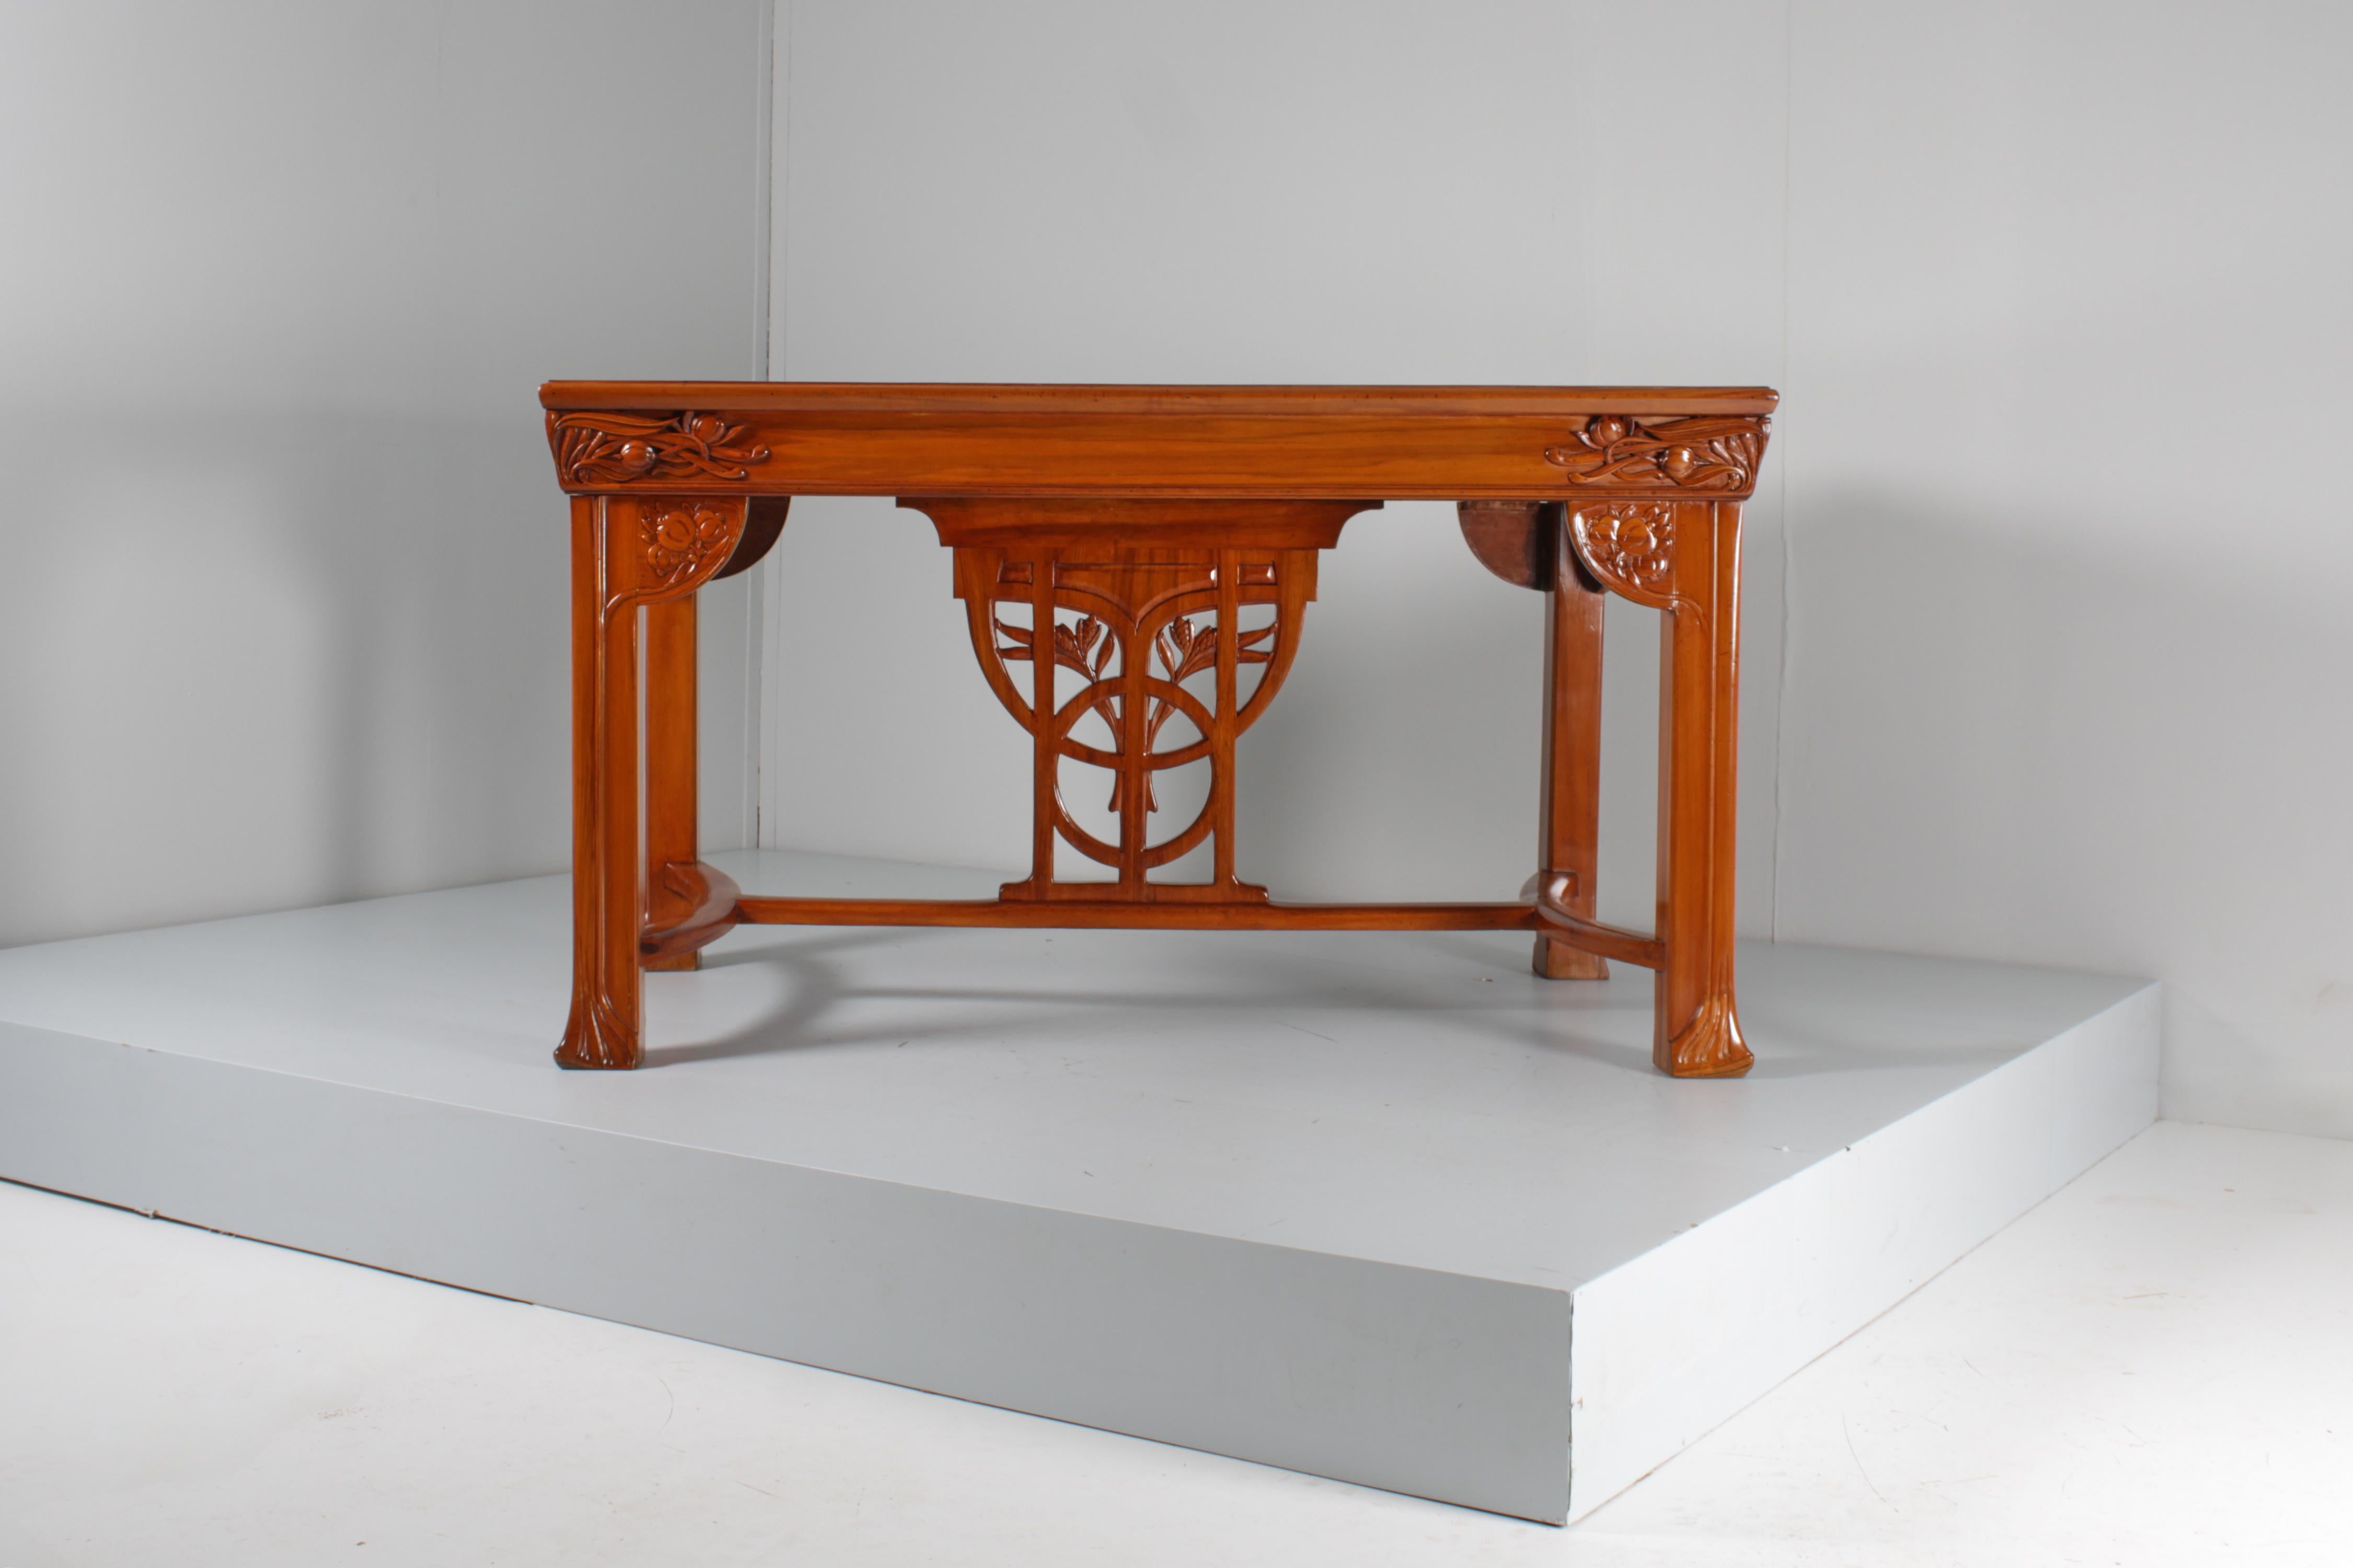 Prestigious rectangular wooden table, restored, in Art Nouveau with carved floral decorations, with veneer and inlays on the top. Officine Ducrot manufacturing, by Vittorio Ducrot, Italy, 1900s. The authenticity label is present.
Wear consistent